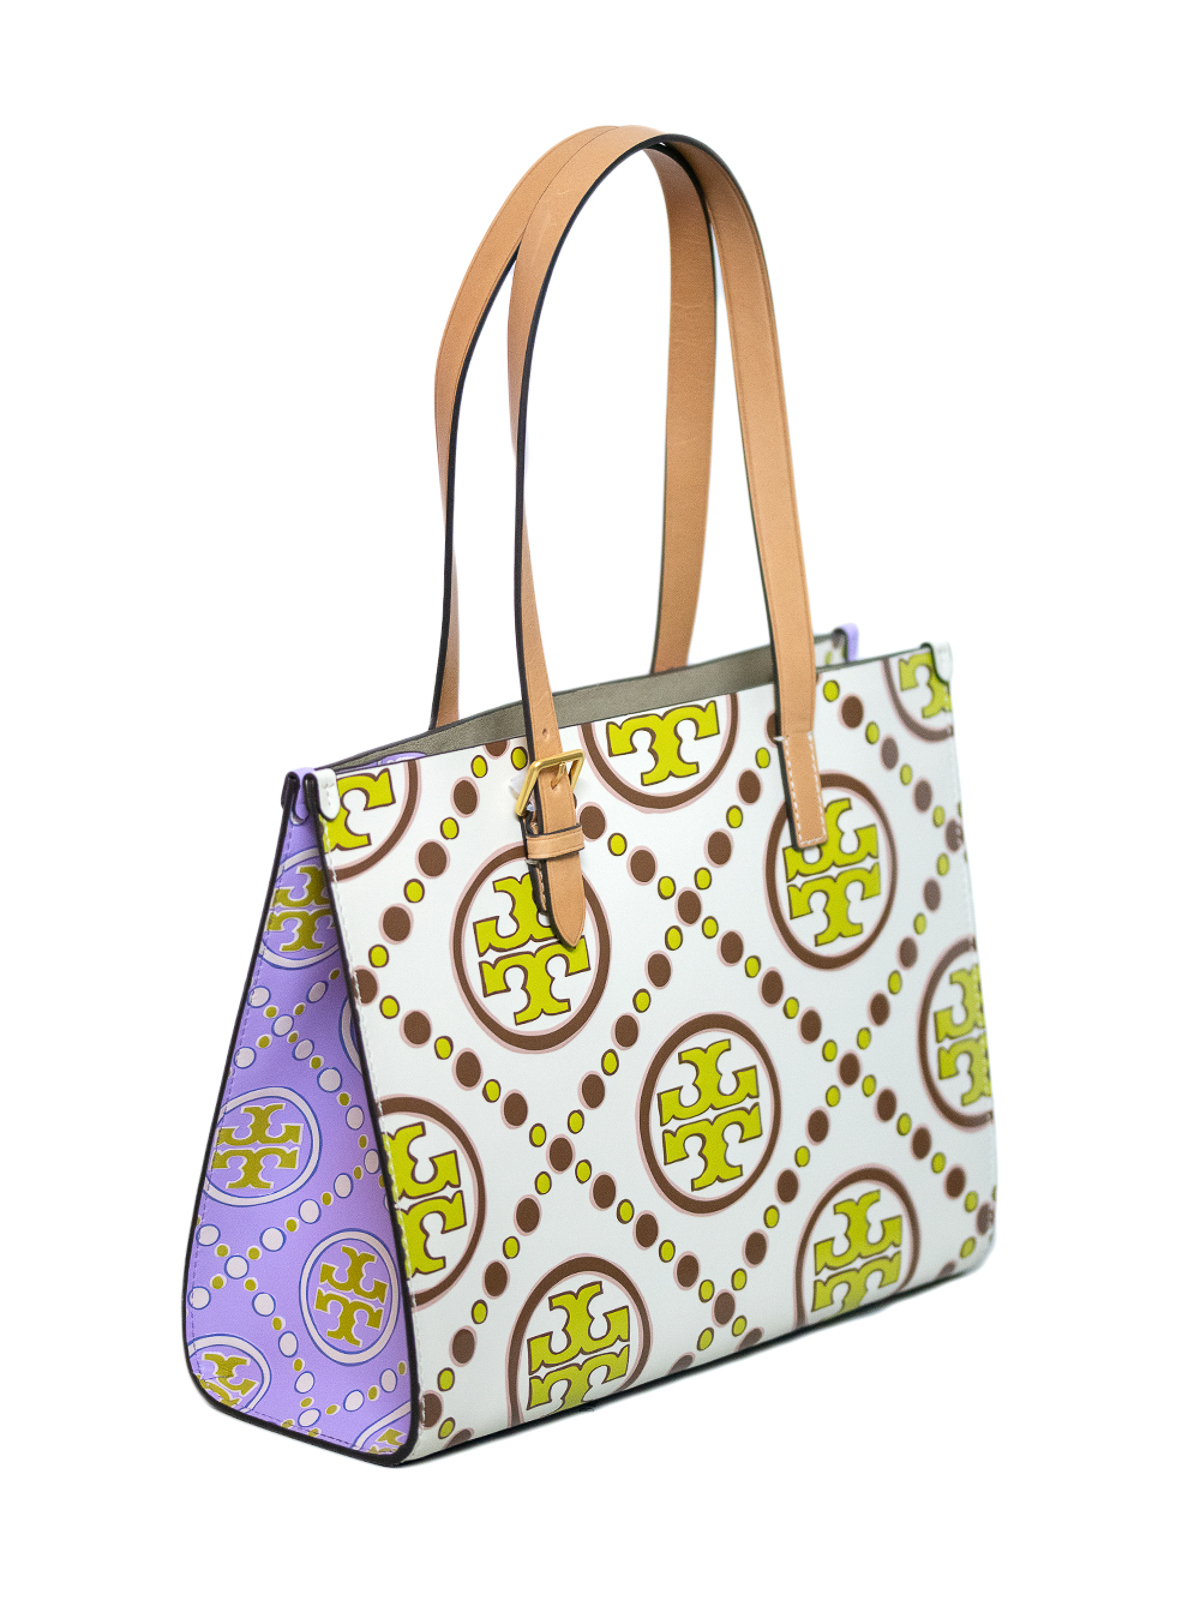 Women's Small T Monogram Tote Bag by Tory Burch